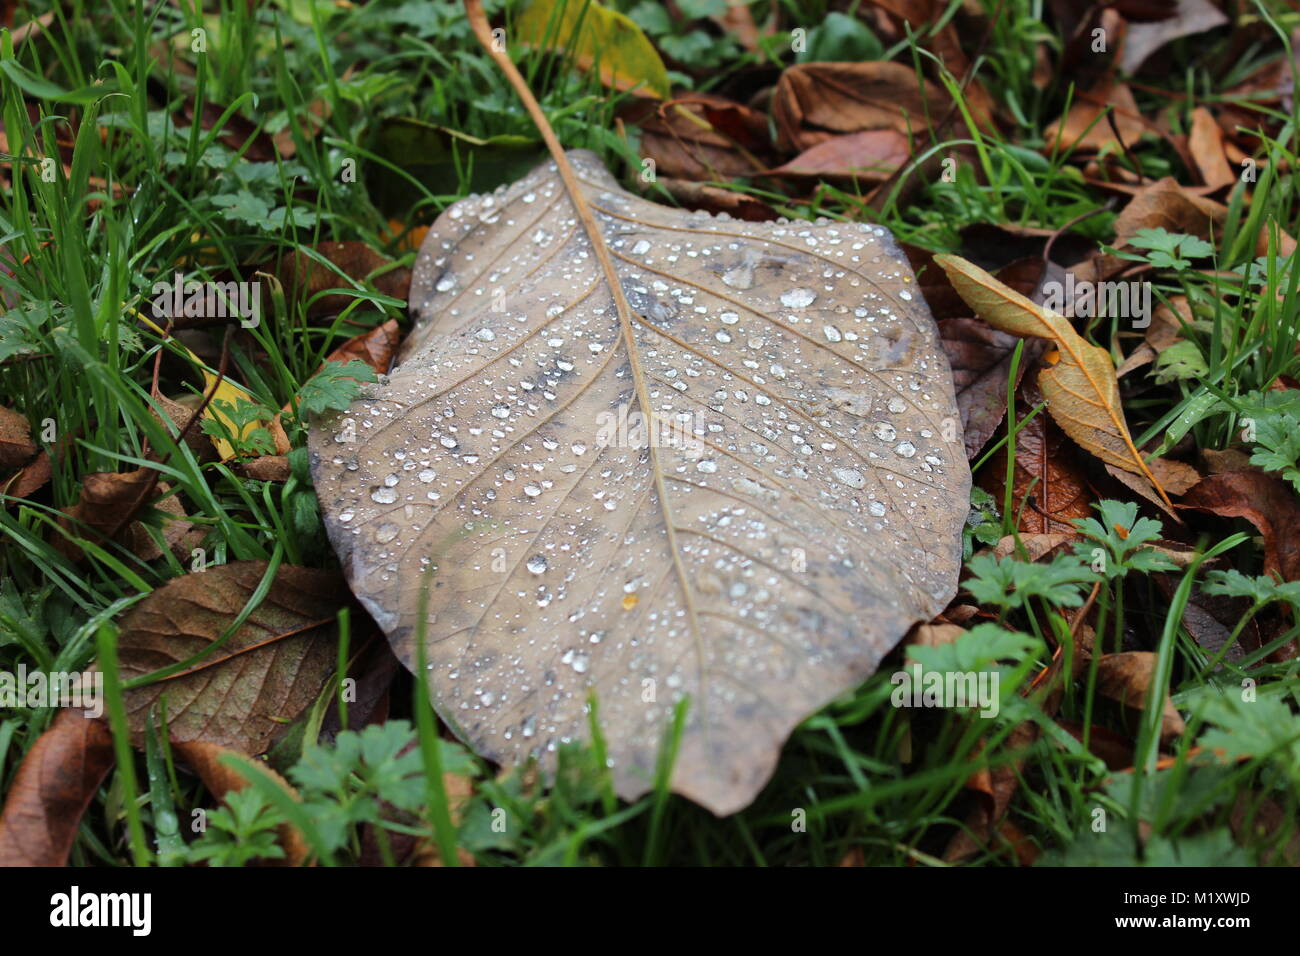 Sparlky raindrops on a dry leaf. Stock Photo